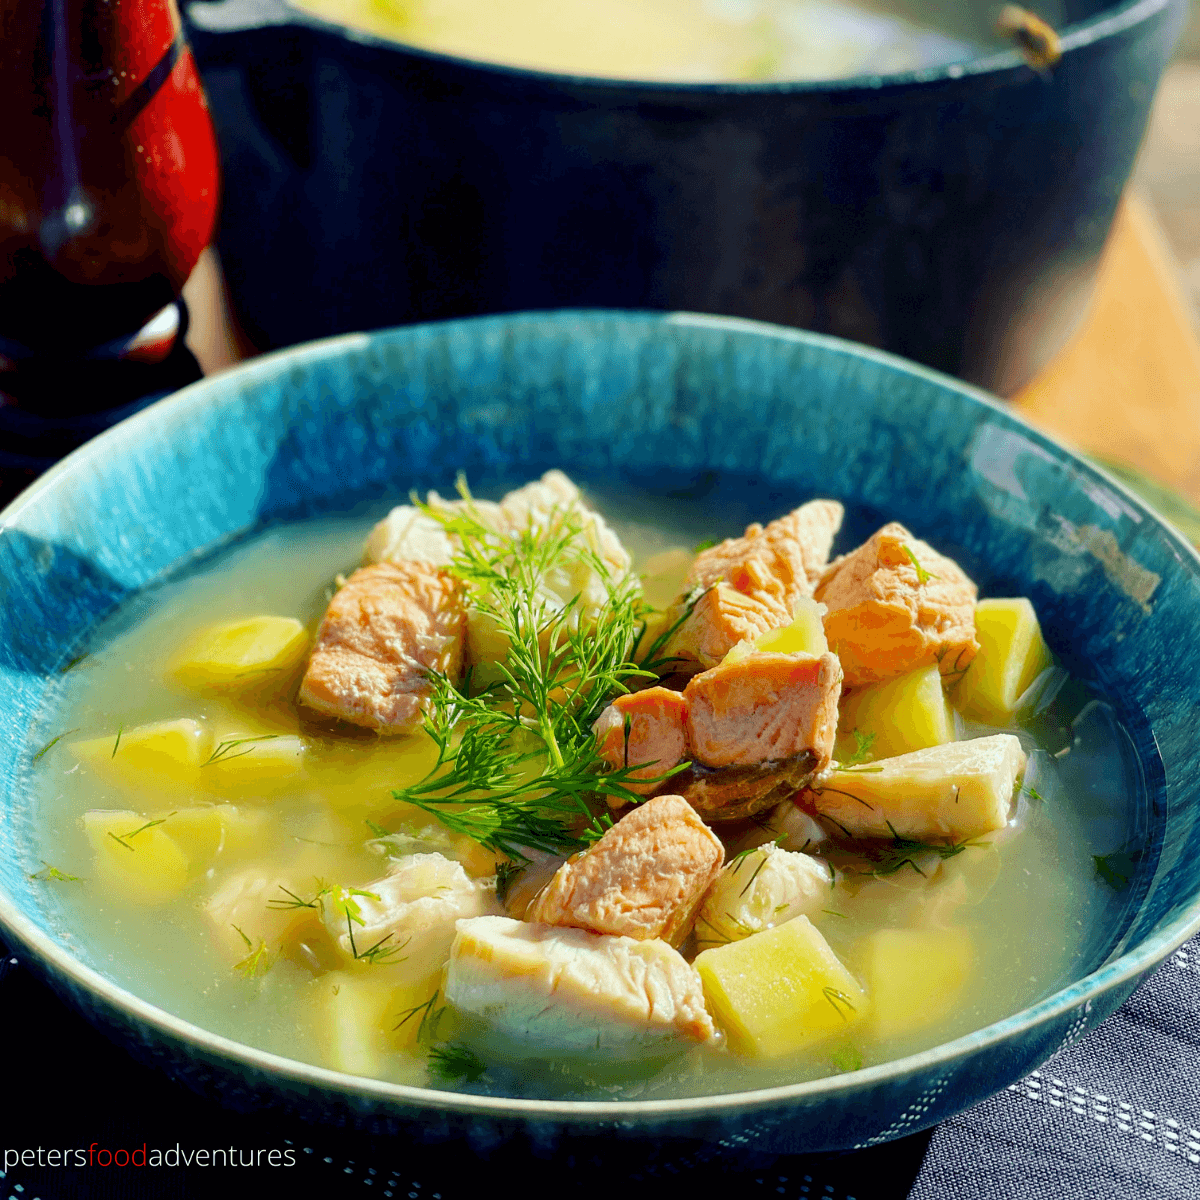 Rustic Russian Fish Head Soup and Fish Broth made with Salmon or Trout, Perch and of course the fish heads with potatoes and dill, enjoyed in Russia for hundred of years - Authentic Ukha Fish Soup (Уха)